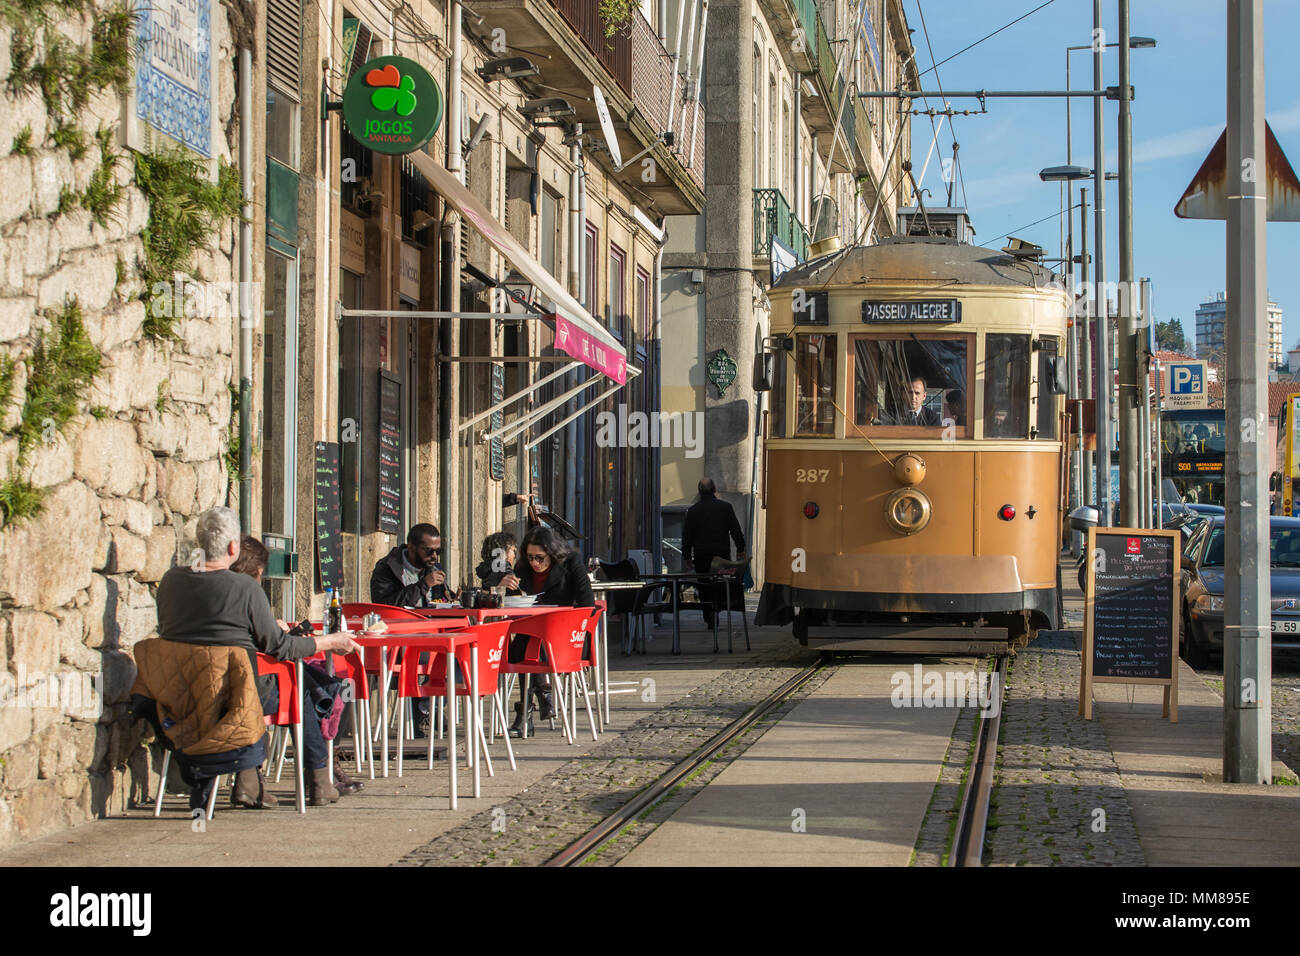 Porto, Portugal - January 19, 2018: Old tram passing by street cafe in Porto, Portugal. Stock Photo